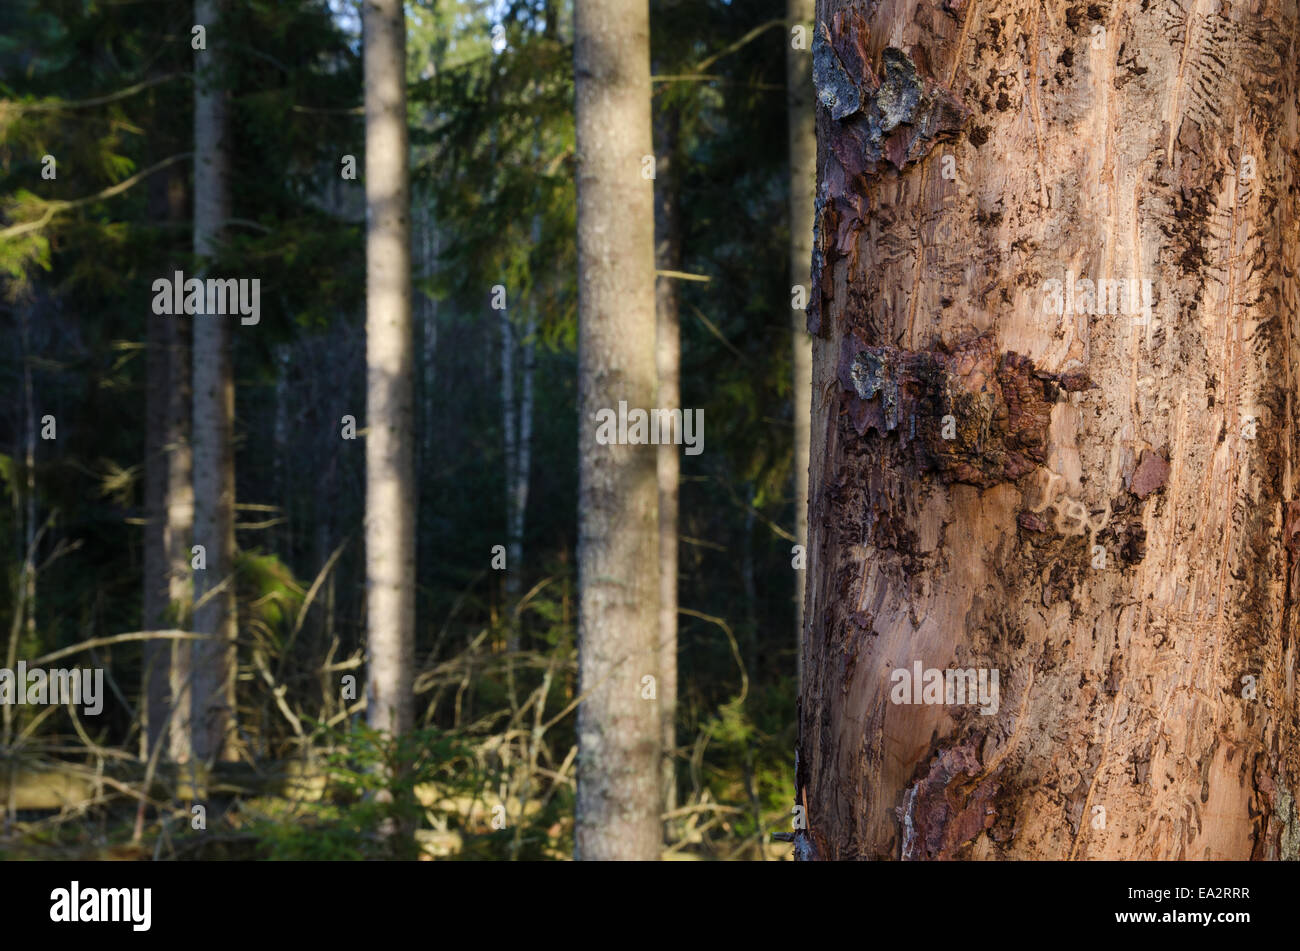 A tree trunk in a spruce forest damaged by bark beetles Stock Photo